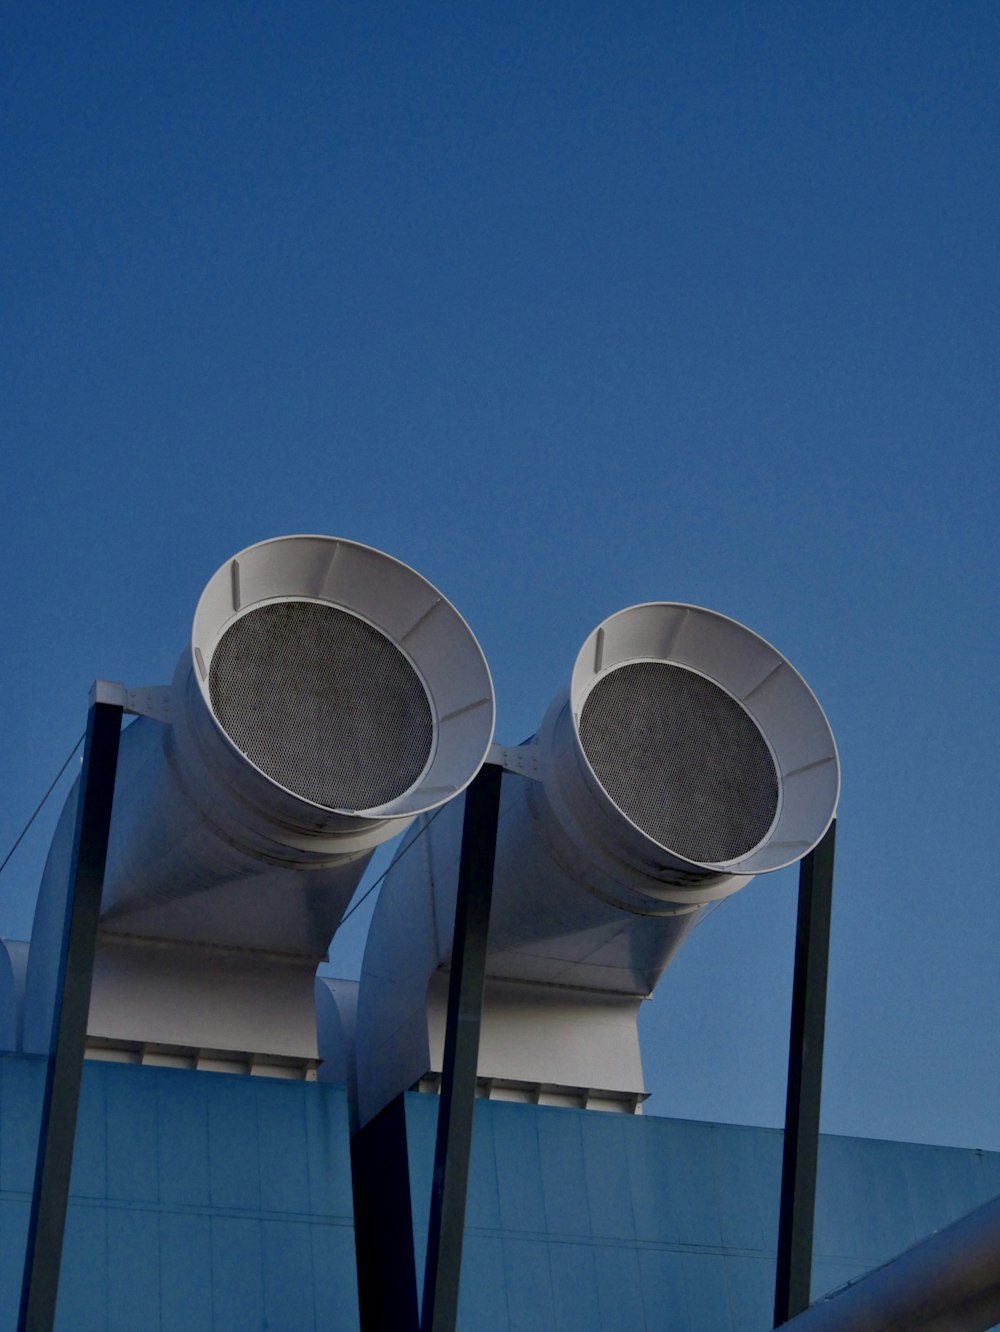 a couple of large metal objects on top of a building